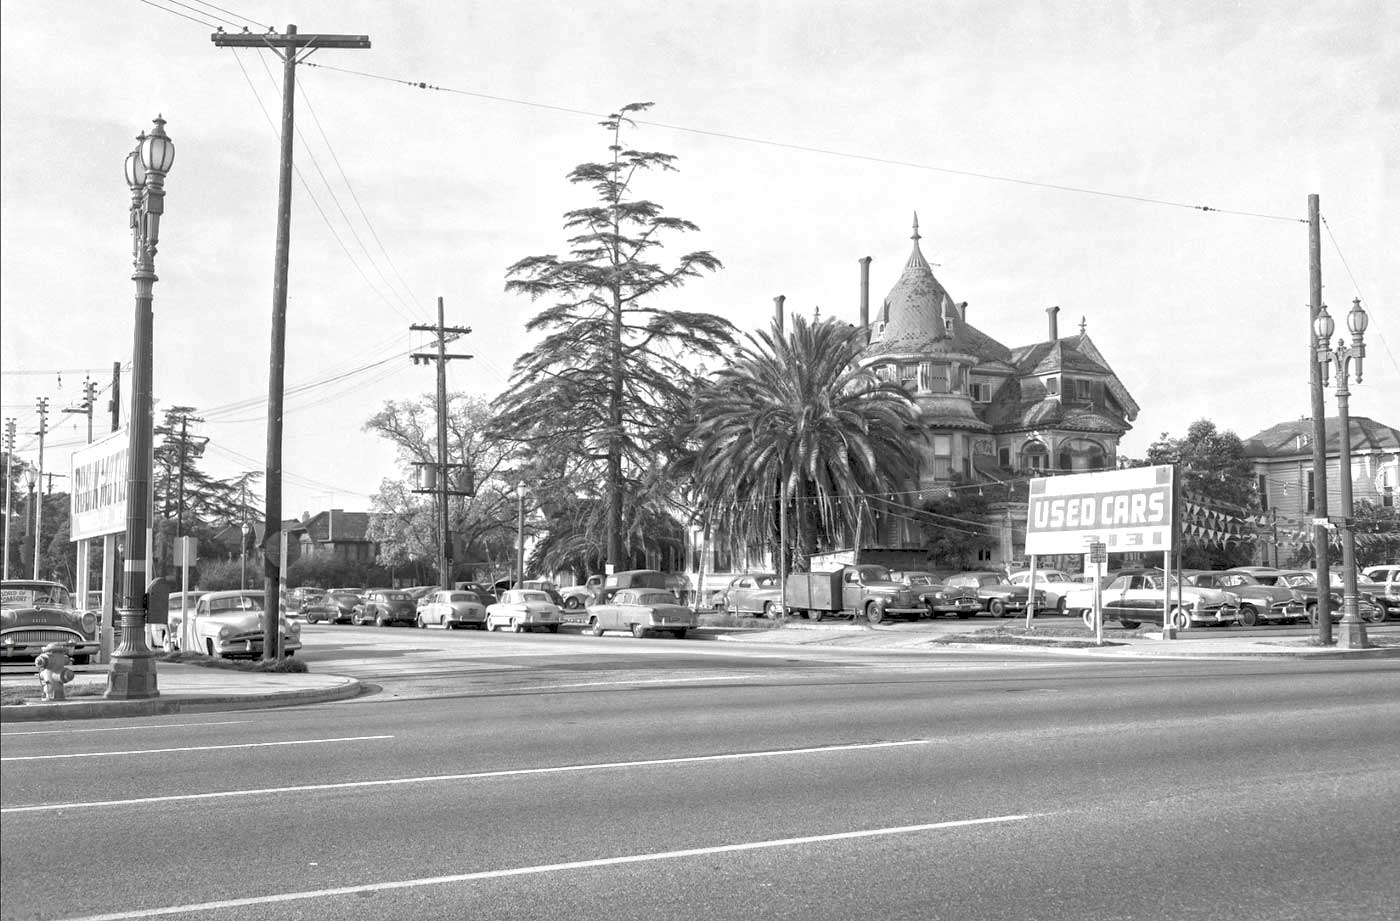 Los Angeles History - 32nd and Figueroa Streets-1950's Photo